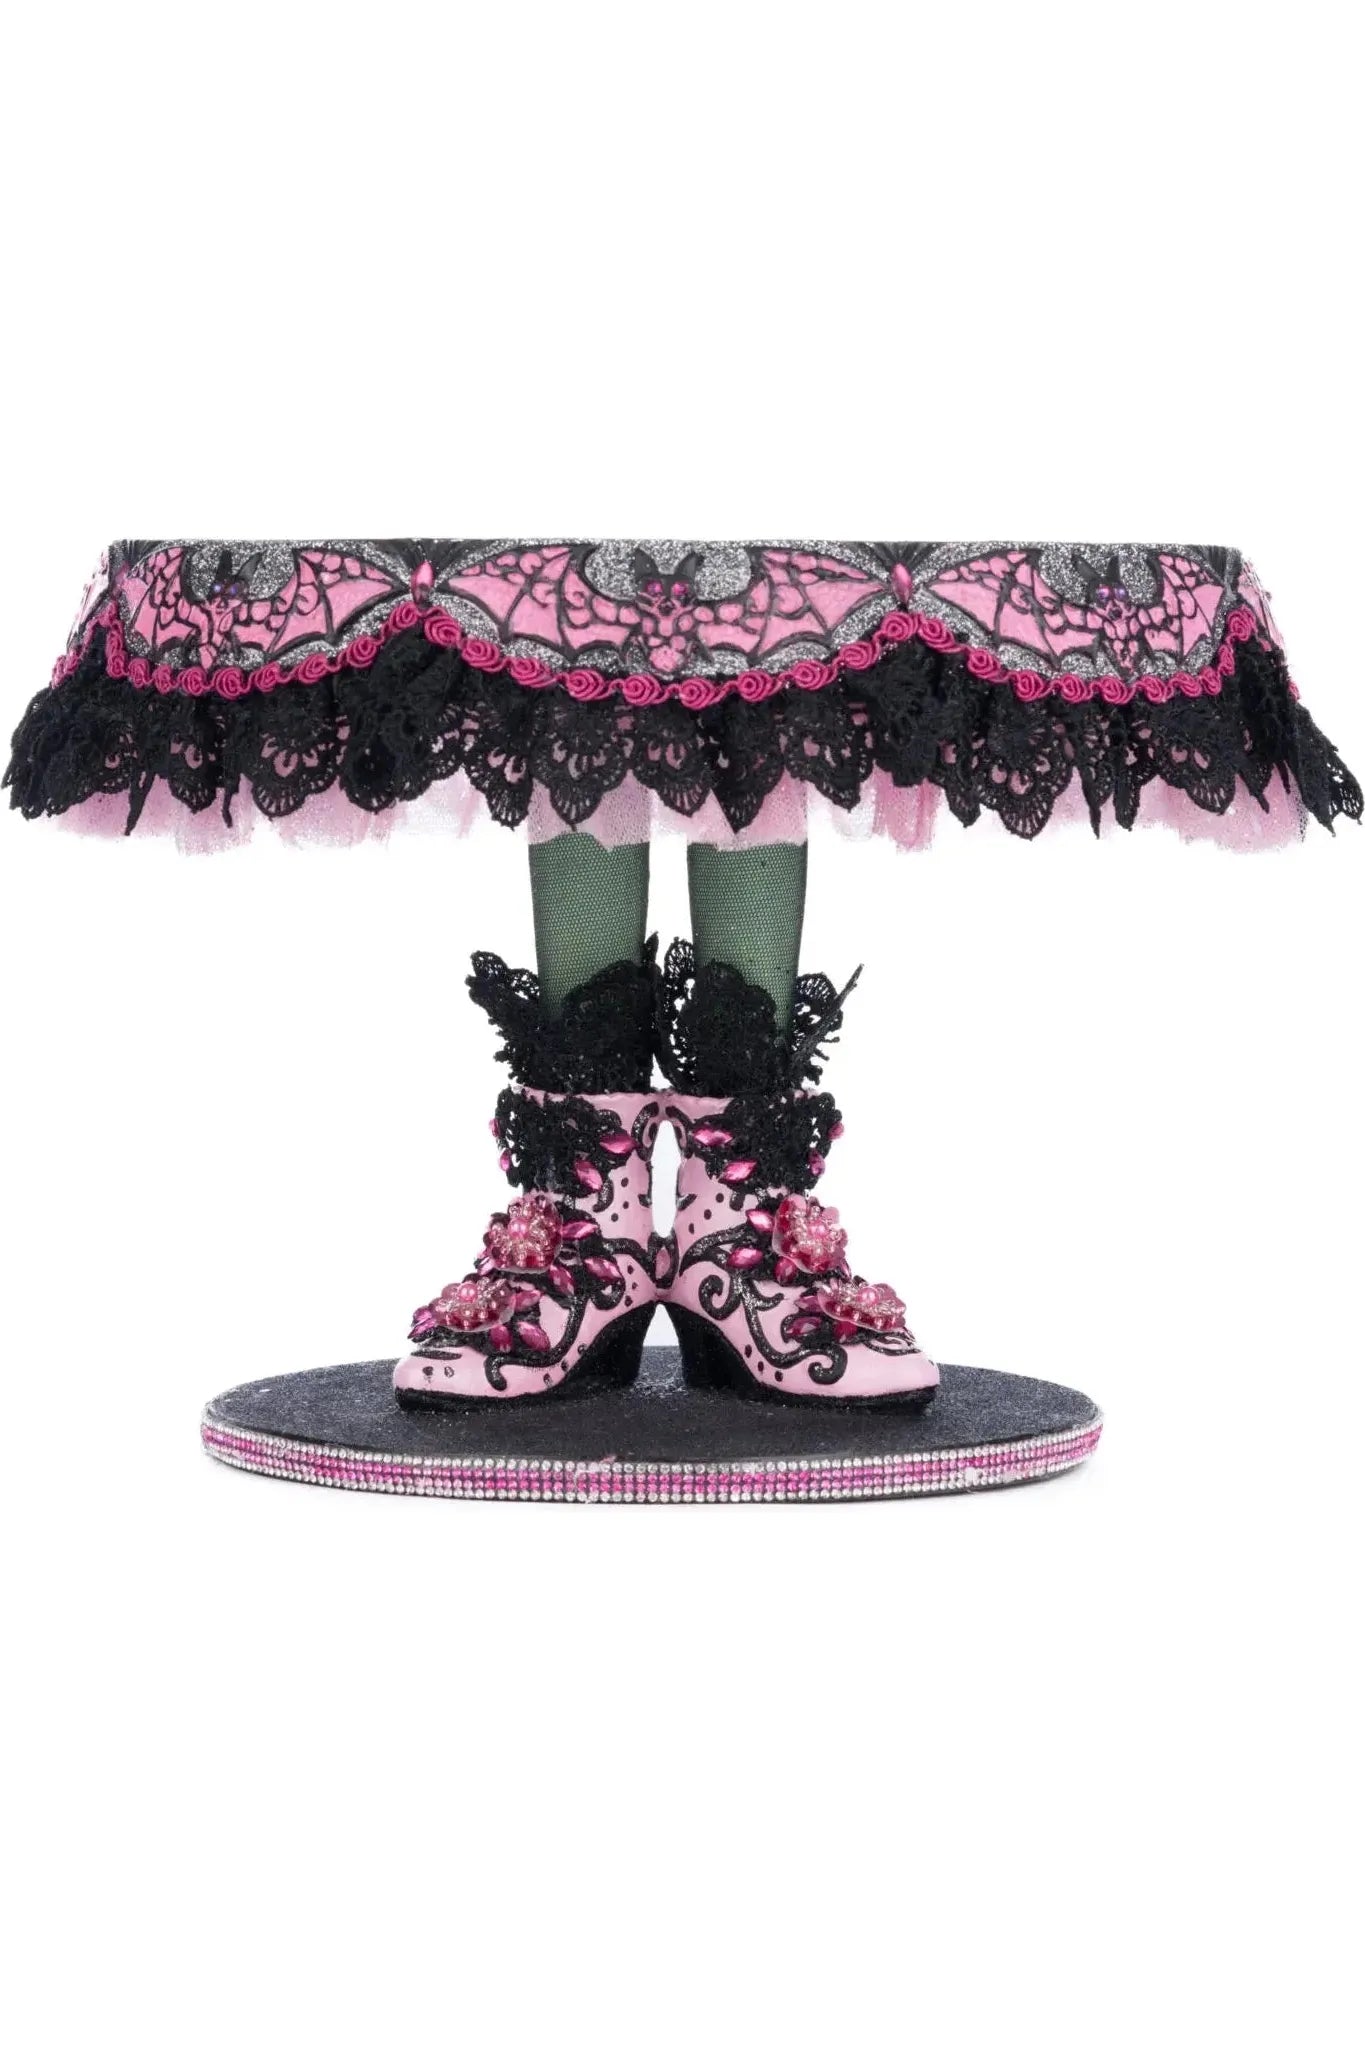 Shop For Pink Panic Possession Witch Boots Cake Plate 28-428142